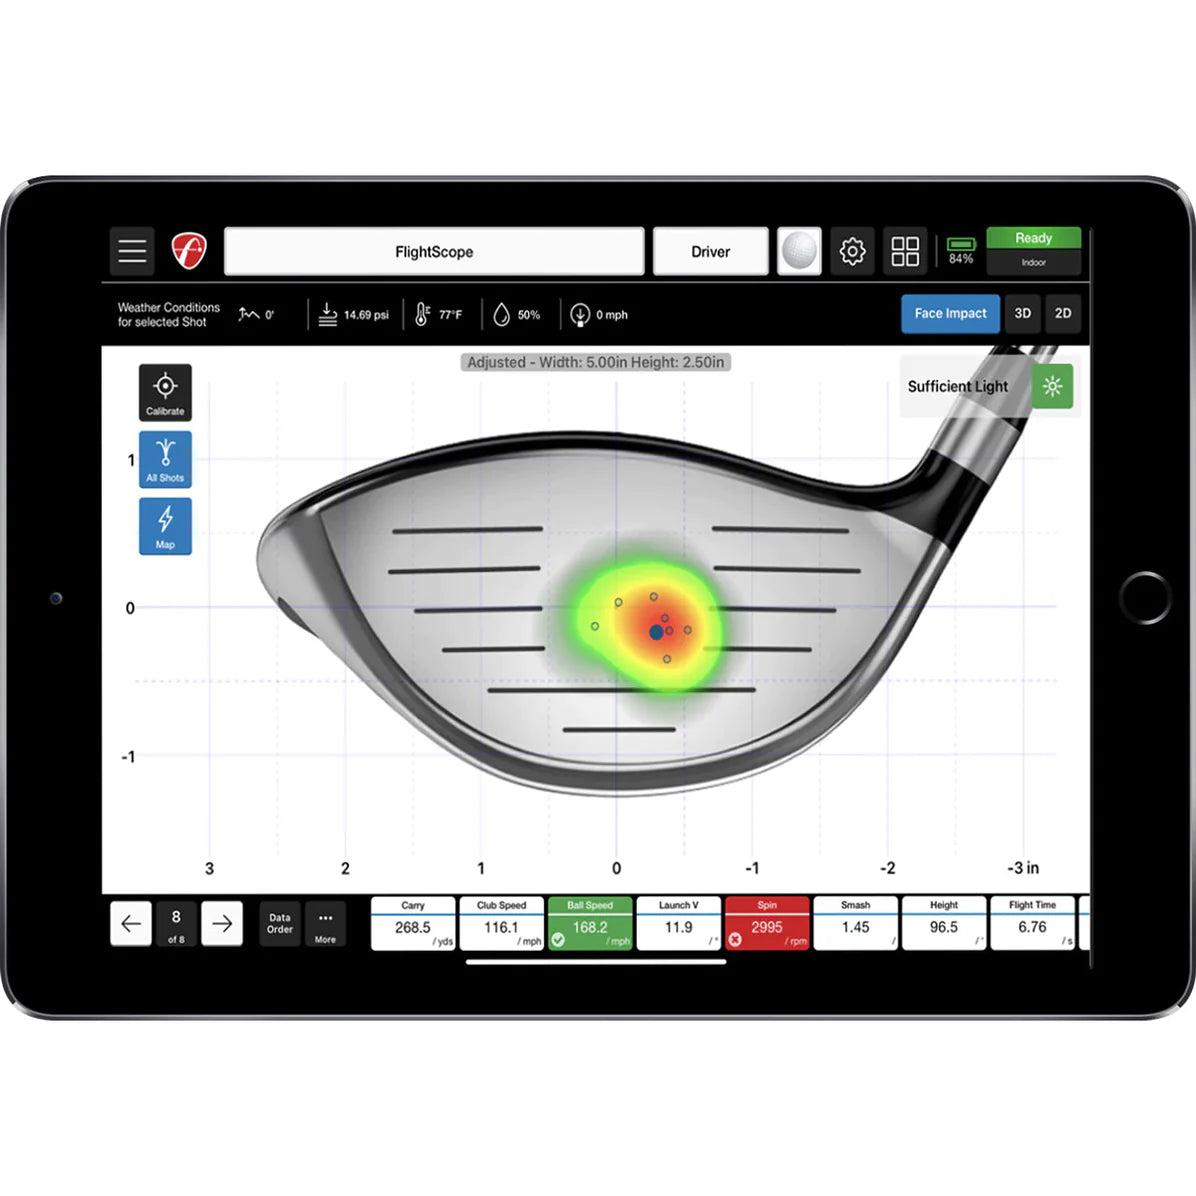 A tablet with the FlightScope Face Impact software open on it with data tiles and a large image of a club head with heat maps showing where the golf ball impacted during the shot